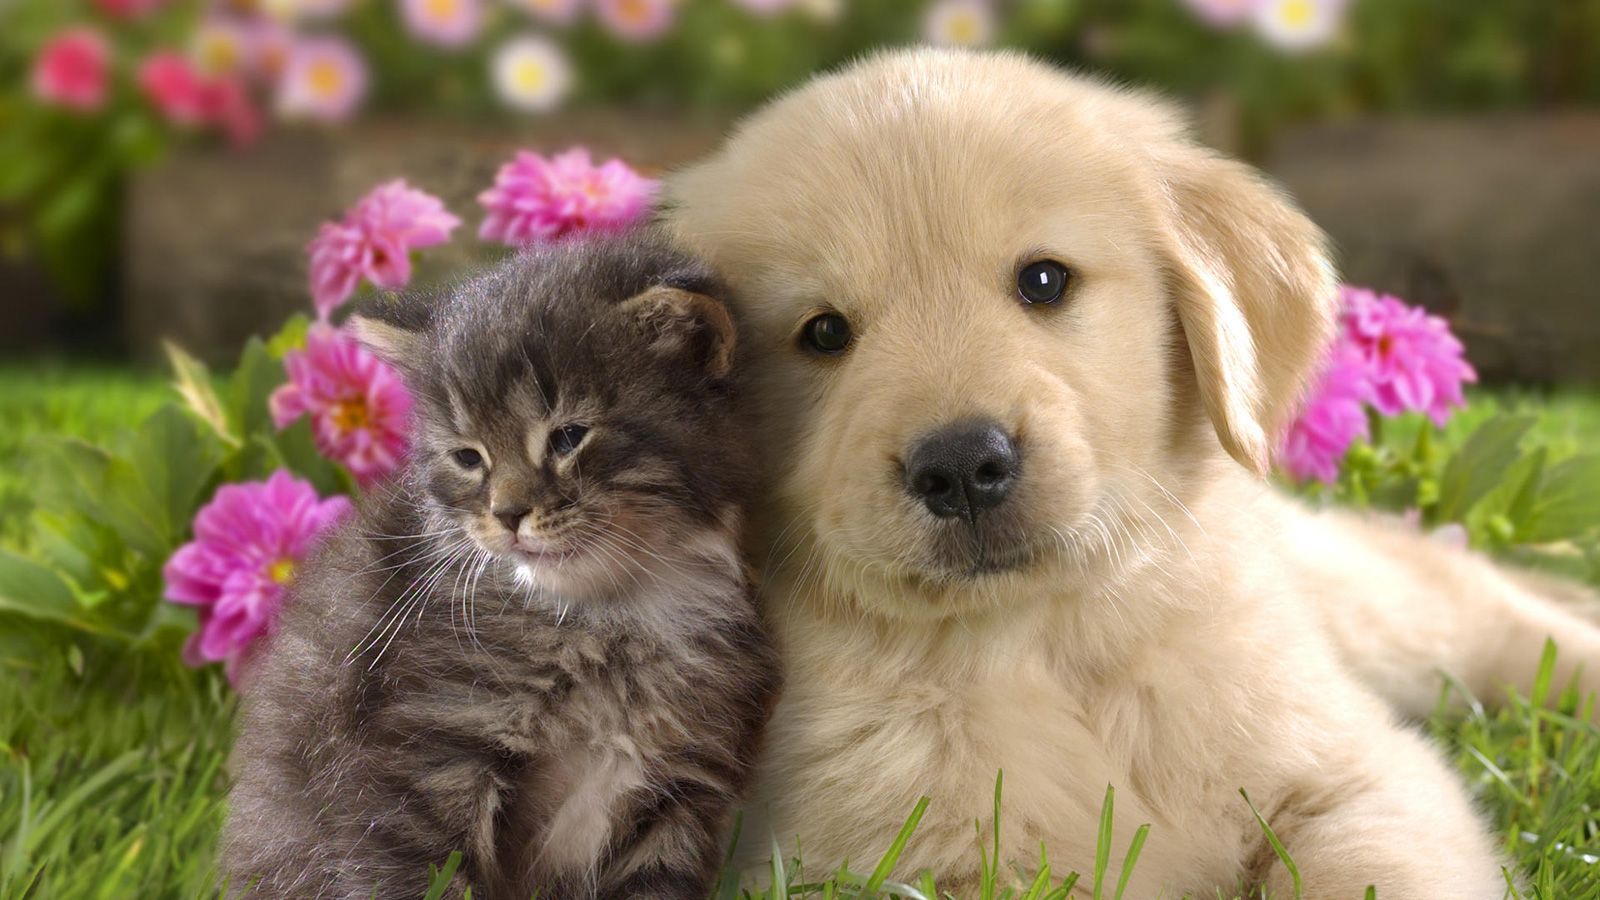 mobile desktop background cute dog and cat pics with captions download